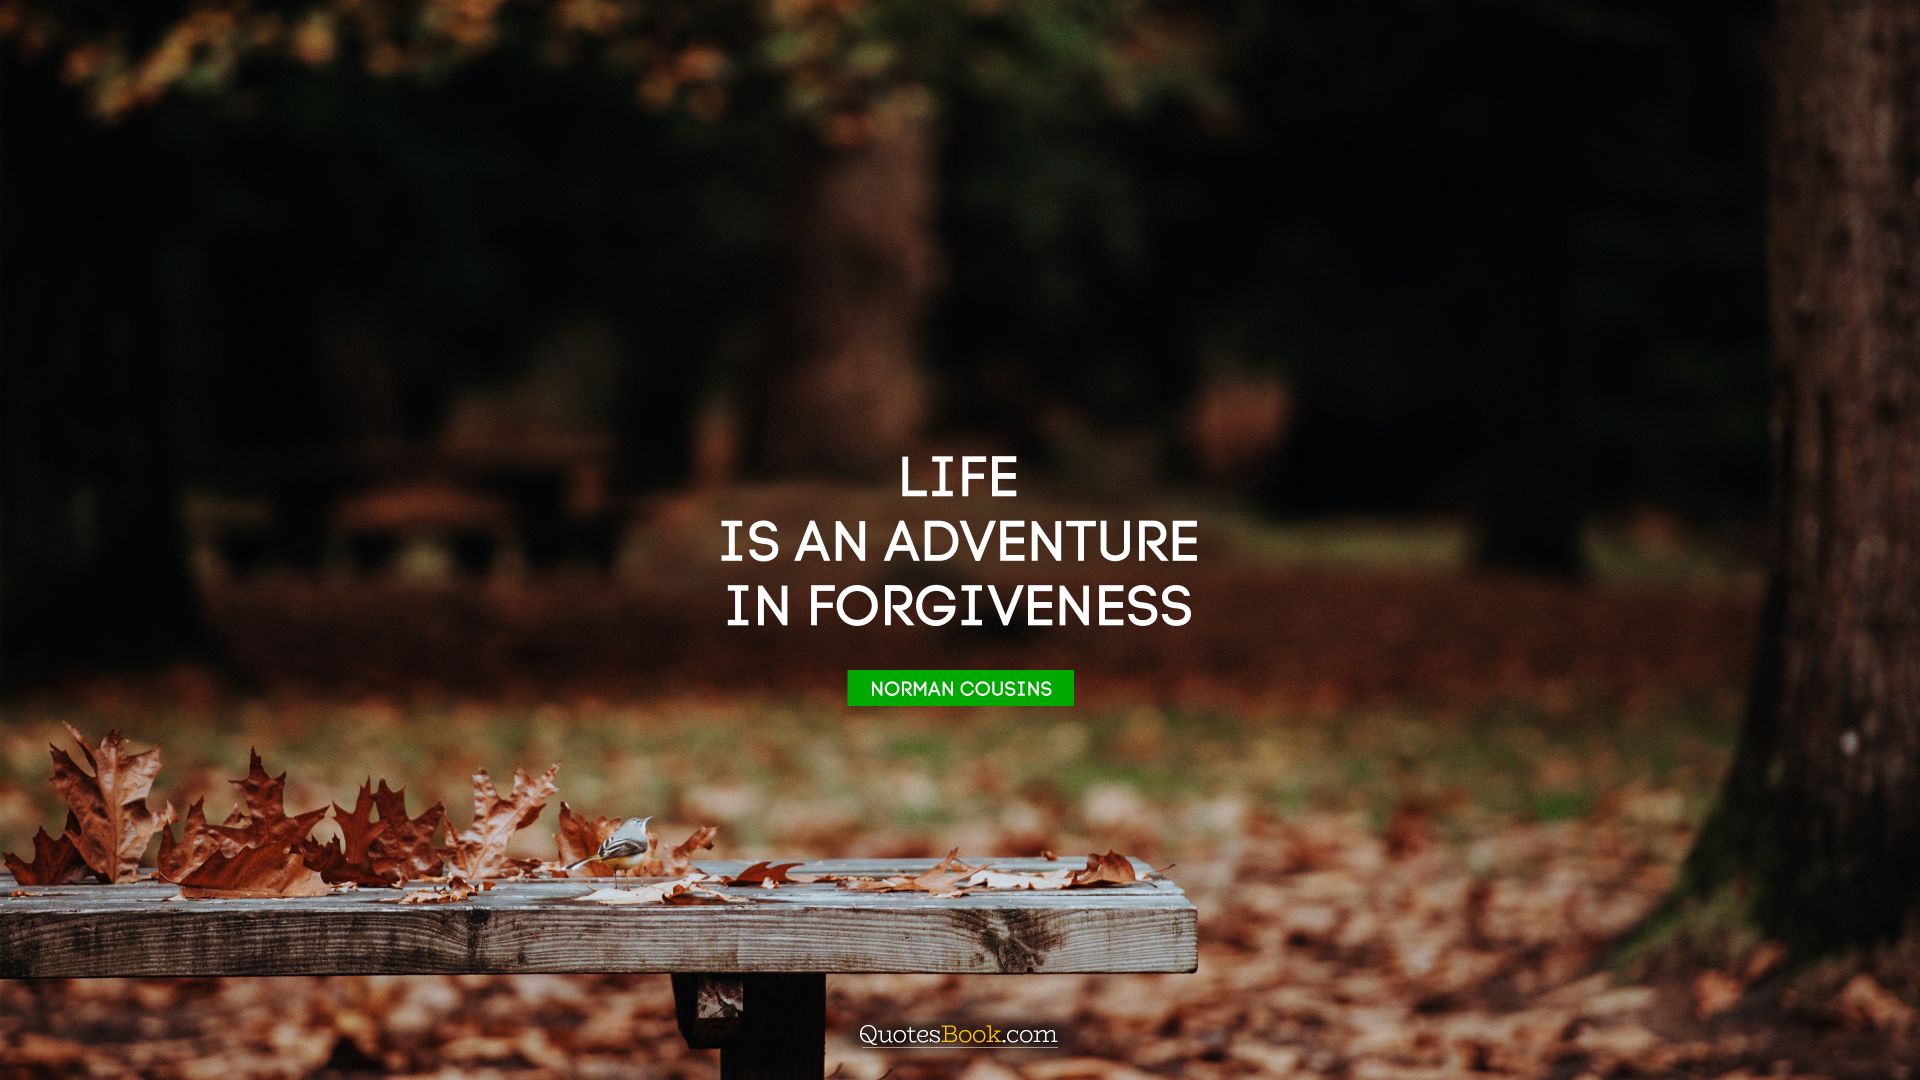 Life is an adventure in forgiveness. - Quote by Norman Cousins